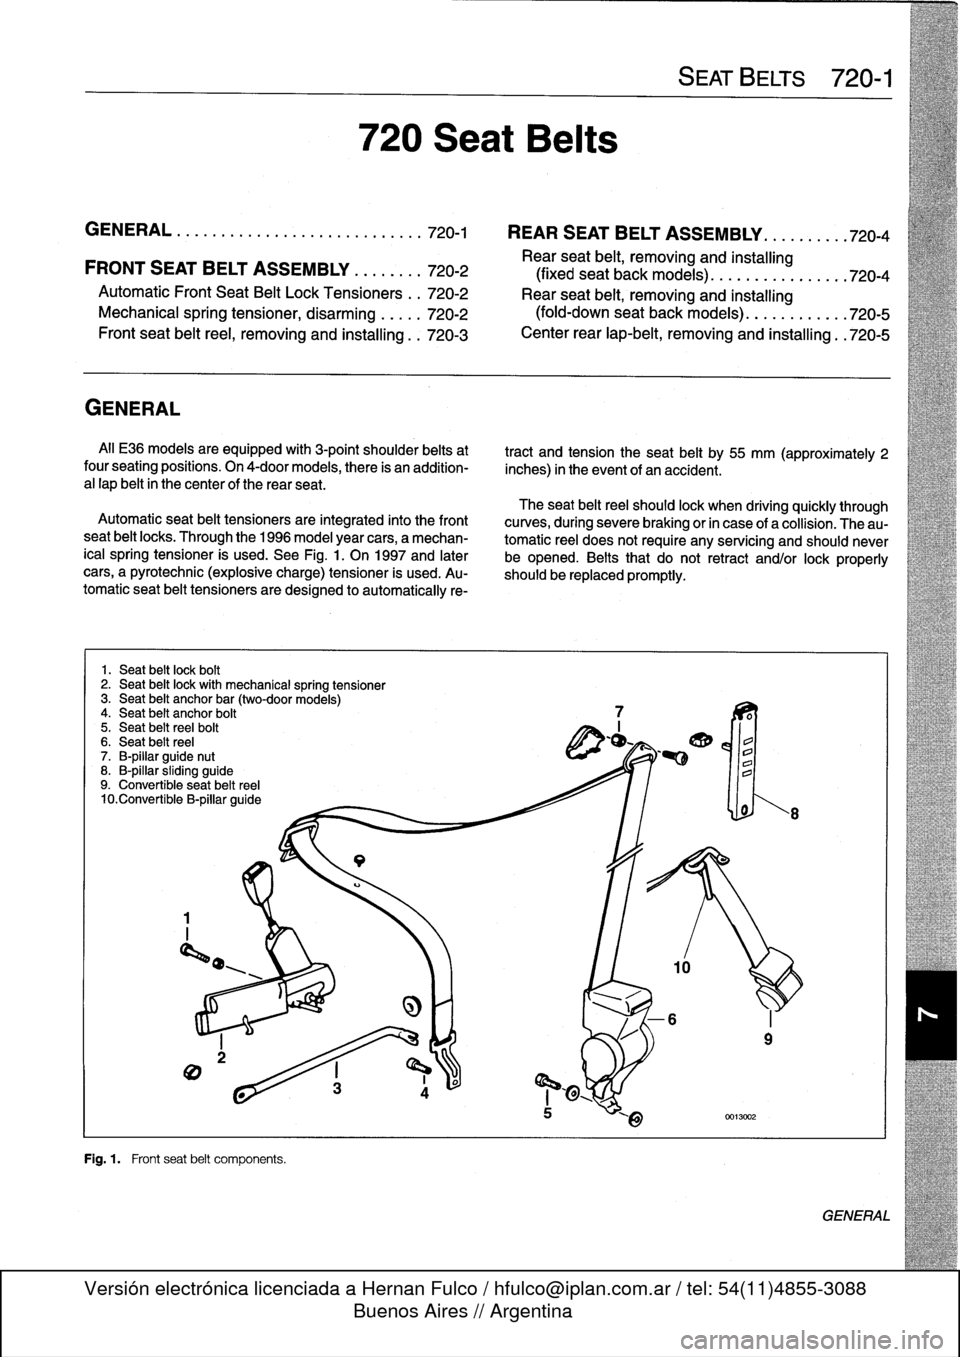 BMW 318i 1997 E36 Owners Guide 
GENERAL
.
.
.....
.
.
.
.
.
.
.
.
.
............
720-1

	

REAR
SEATBELT
ASSEMBLY
...
.
....
.
.
720-4

Rear
seat
belt,
removing
and
installing
FRONT
SEATBELT
ASSEMBLY
.
.
.
.
.
.
.
.
720-2

	

(fixe